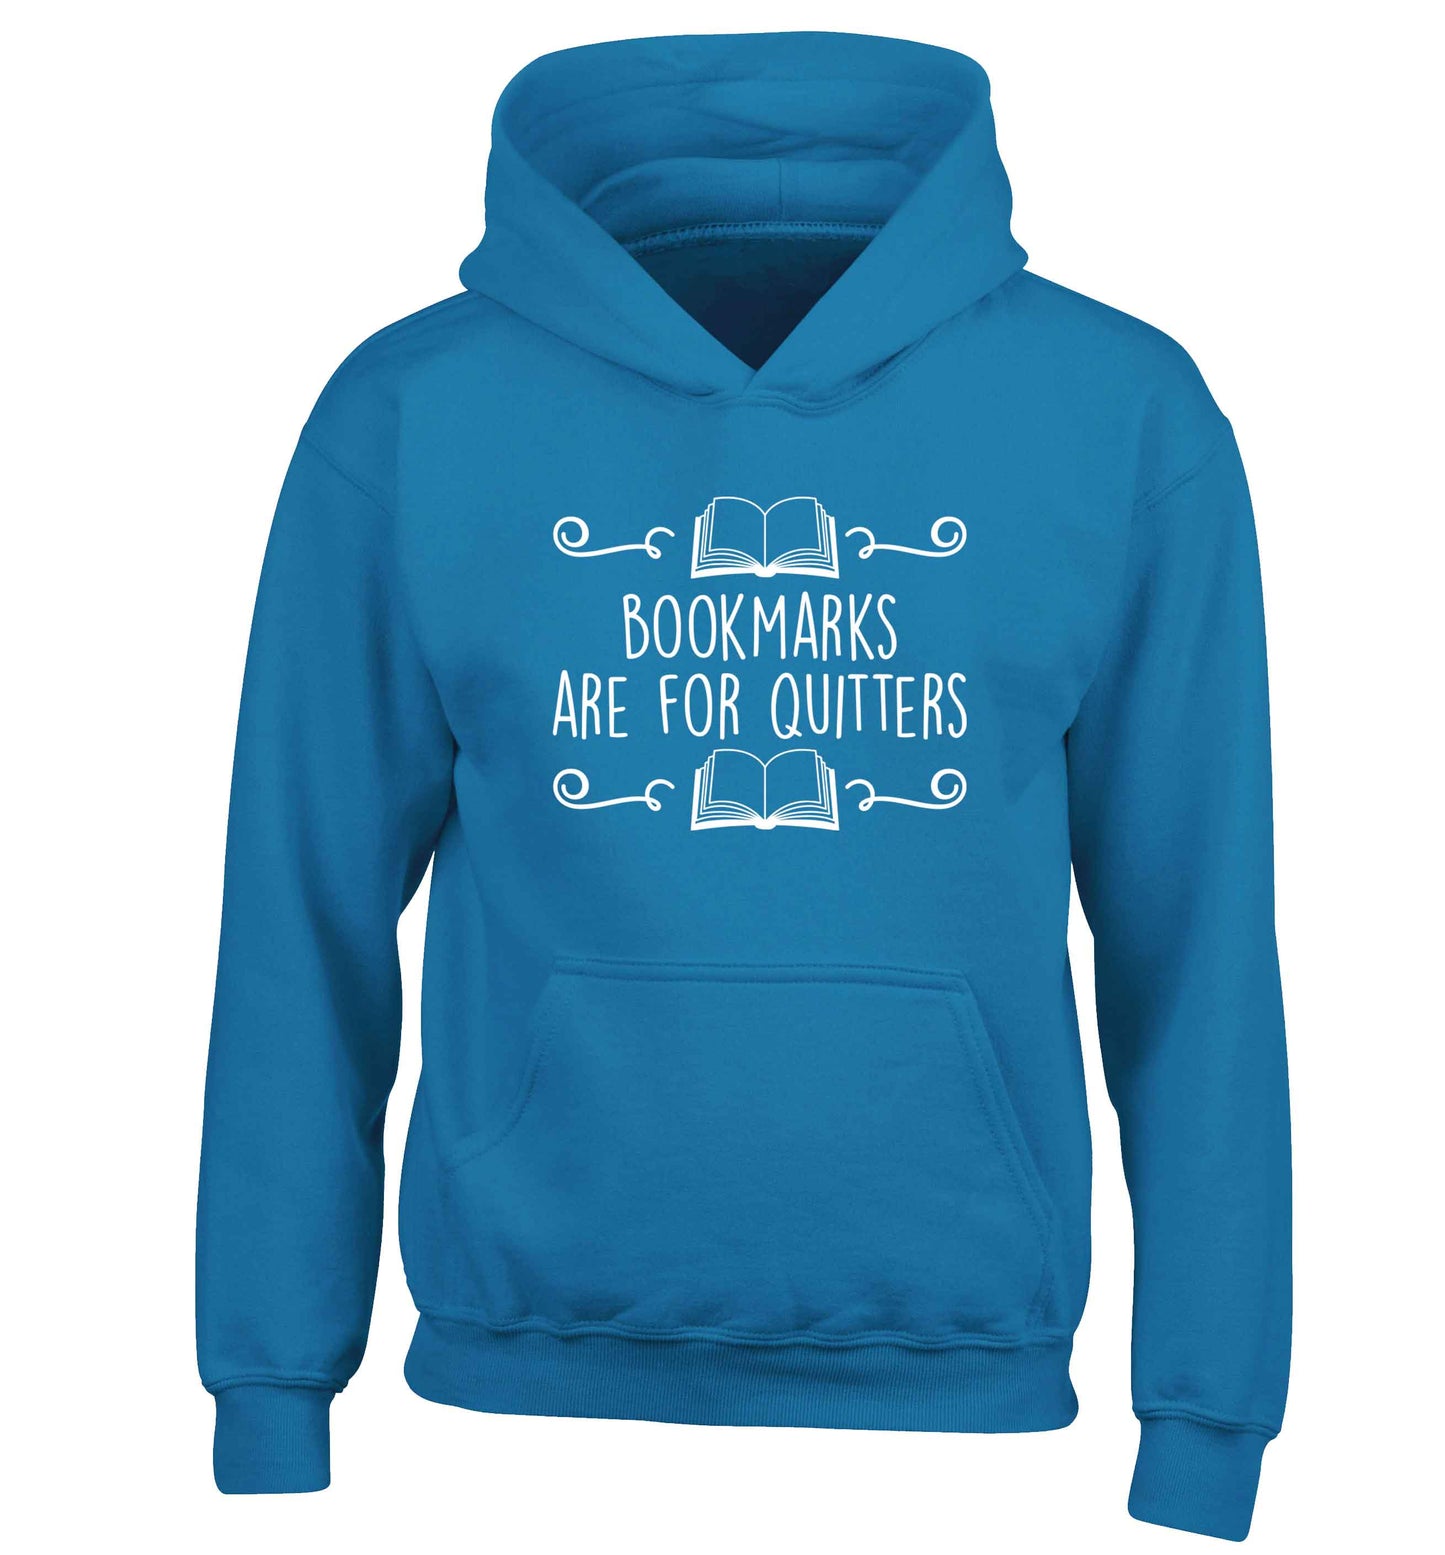 Bookmarks are for quitters children's blue hoodie 12-13 Years